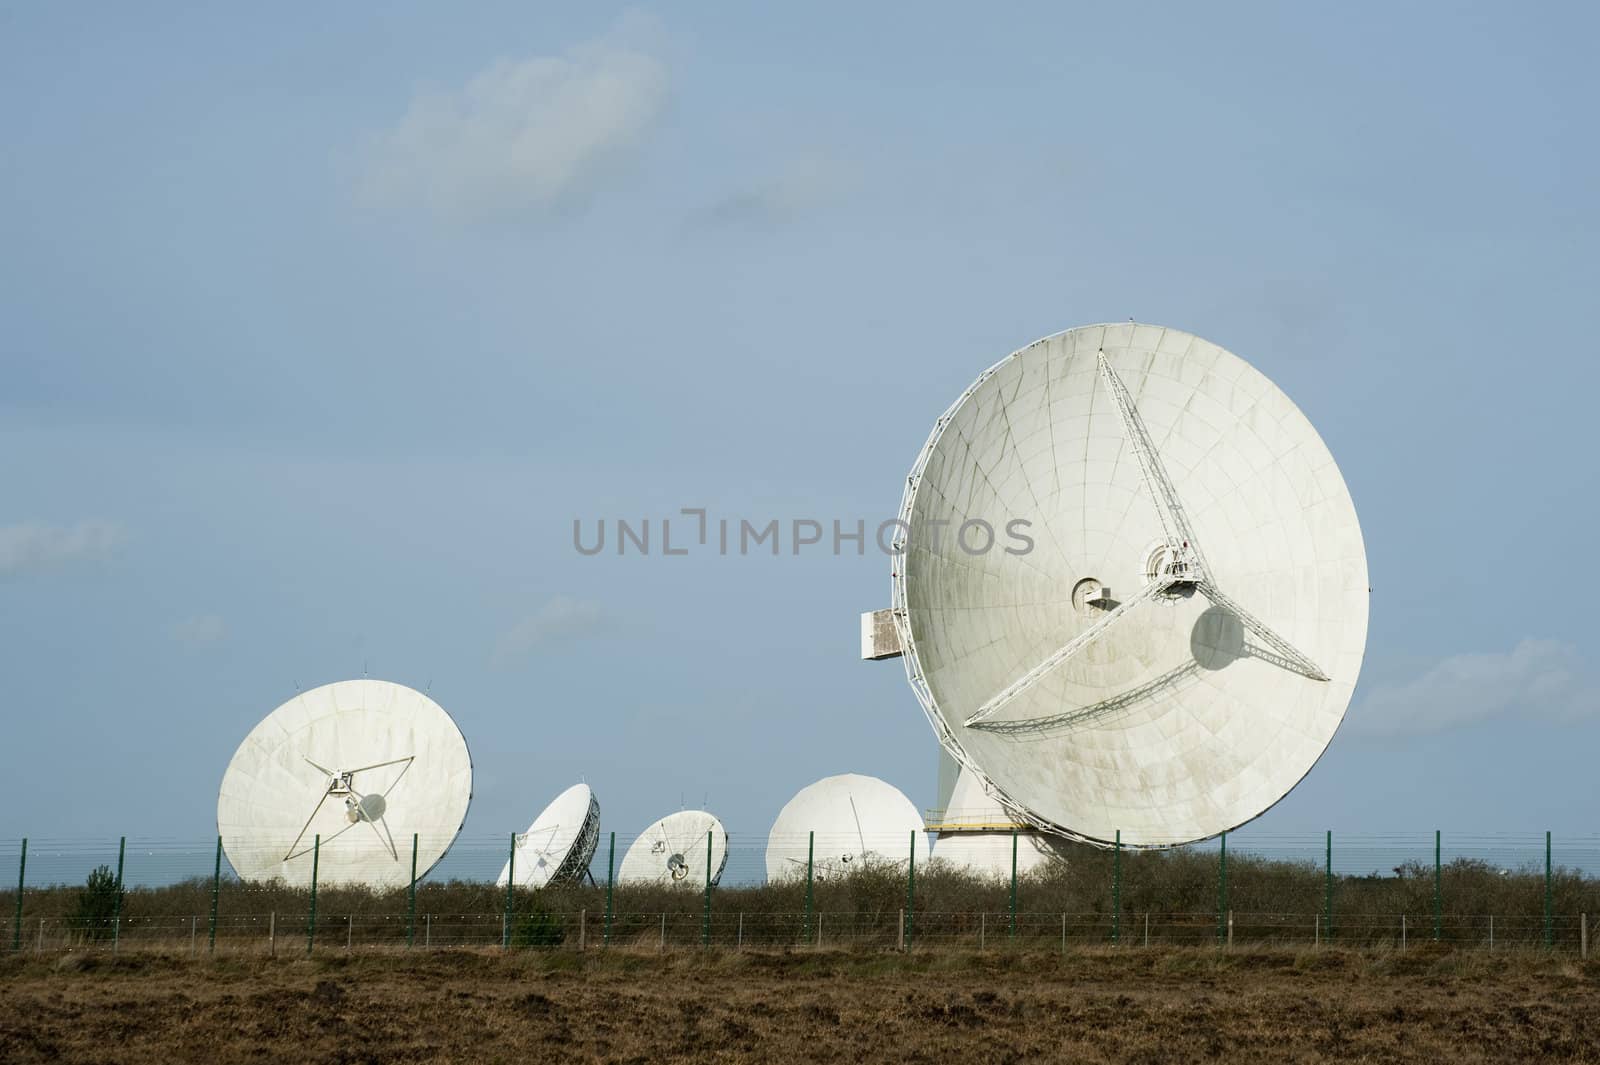 View of the large parabolic satellite antennas at the Goonhilly Earth Station, Lizard Peninsula, Cornwall which houses a historic parabolic dish called Arthur